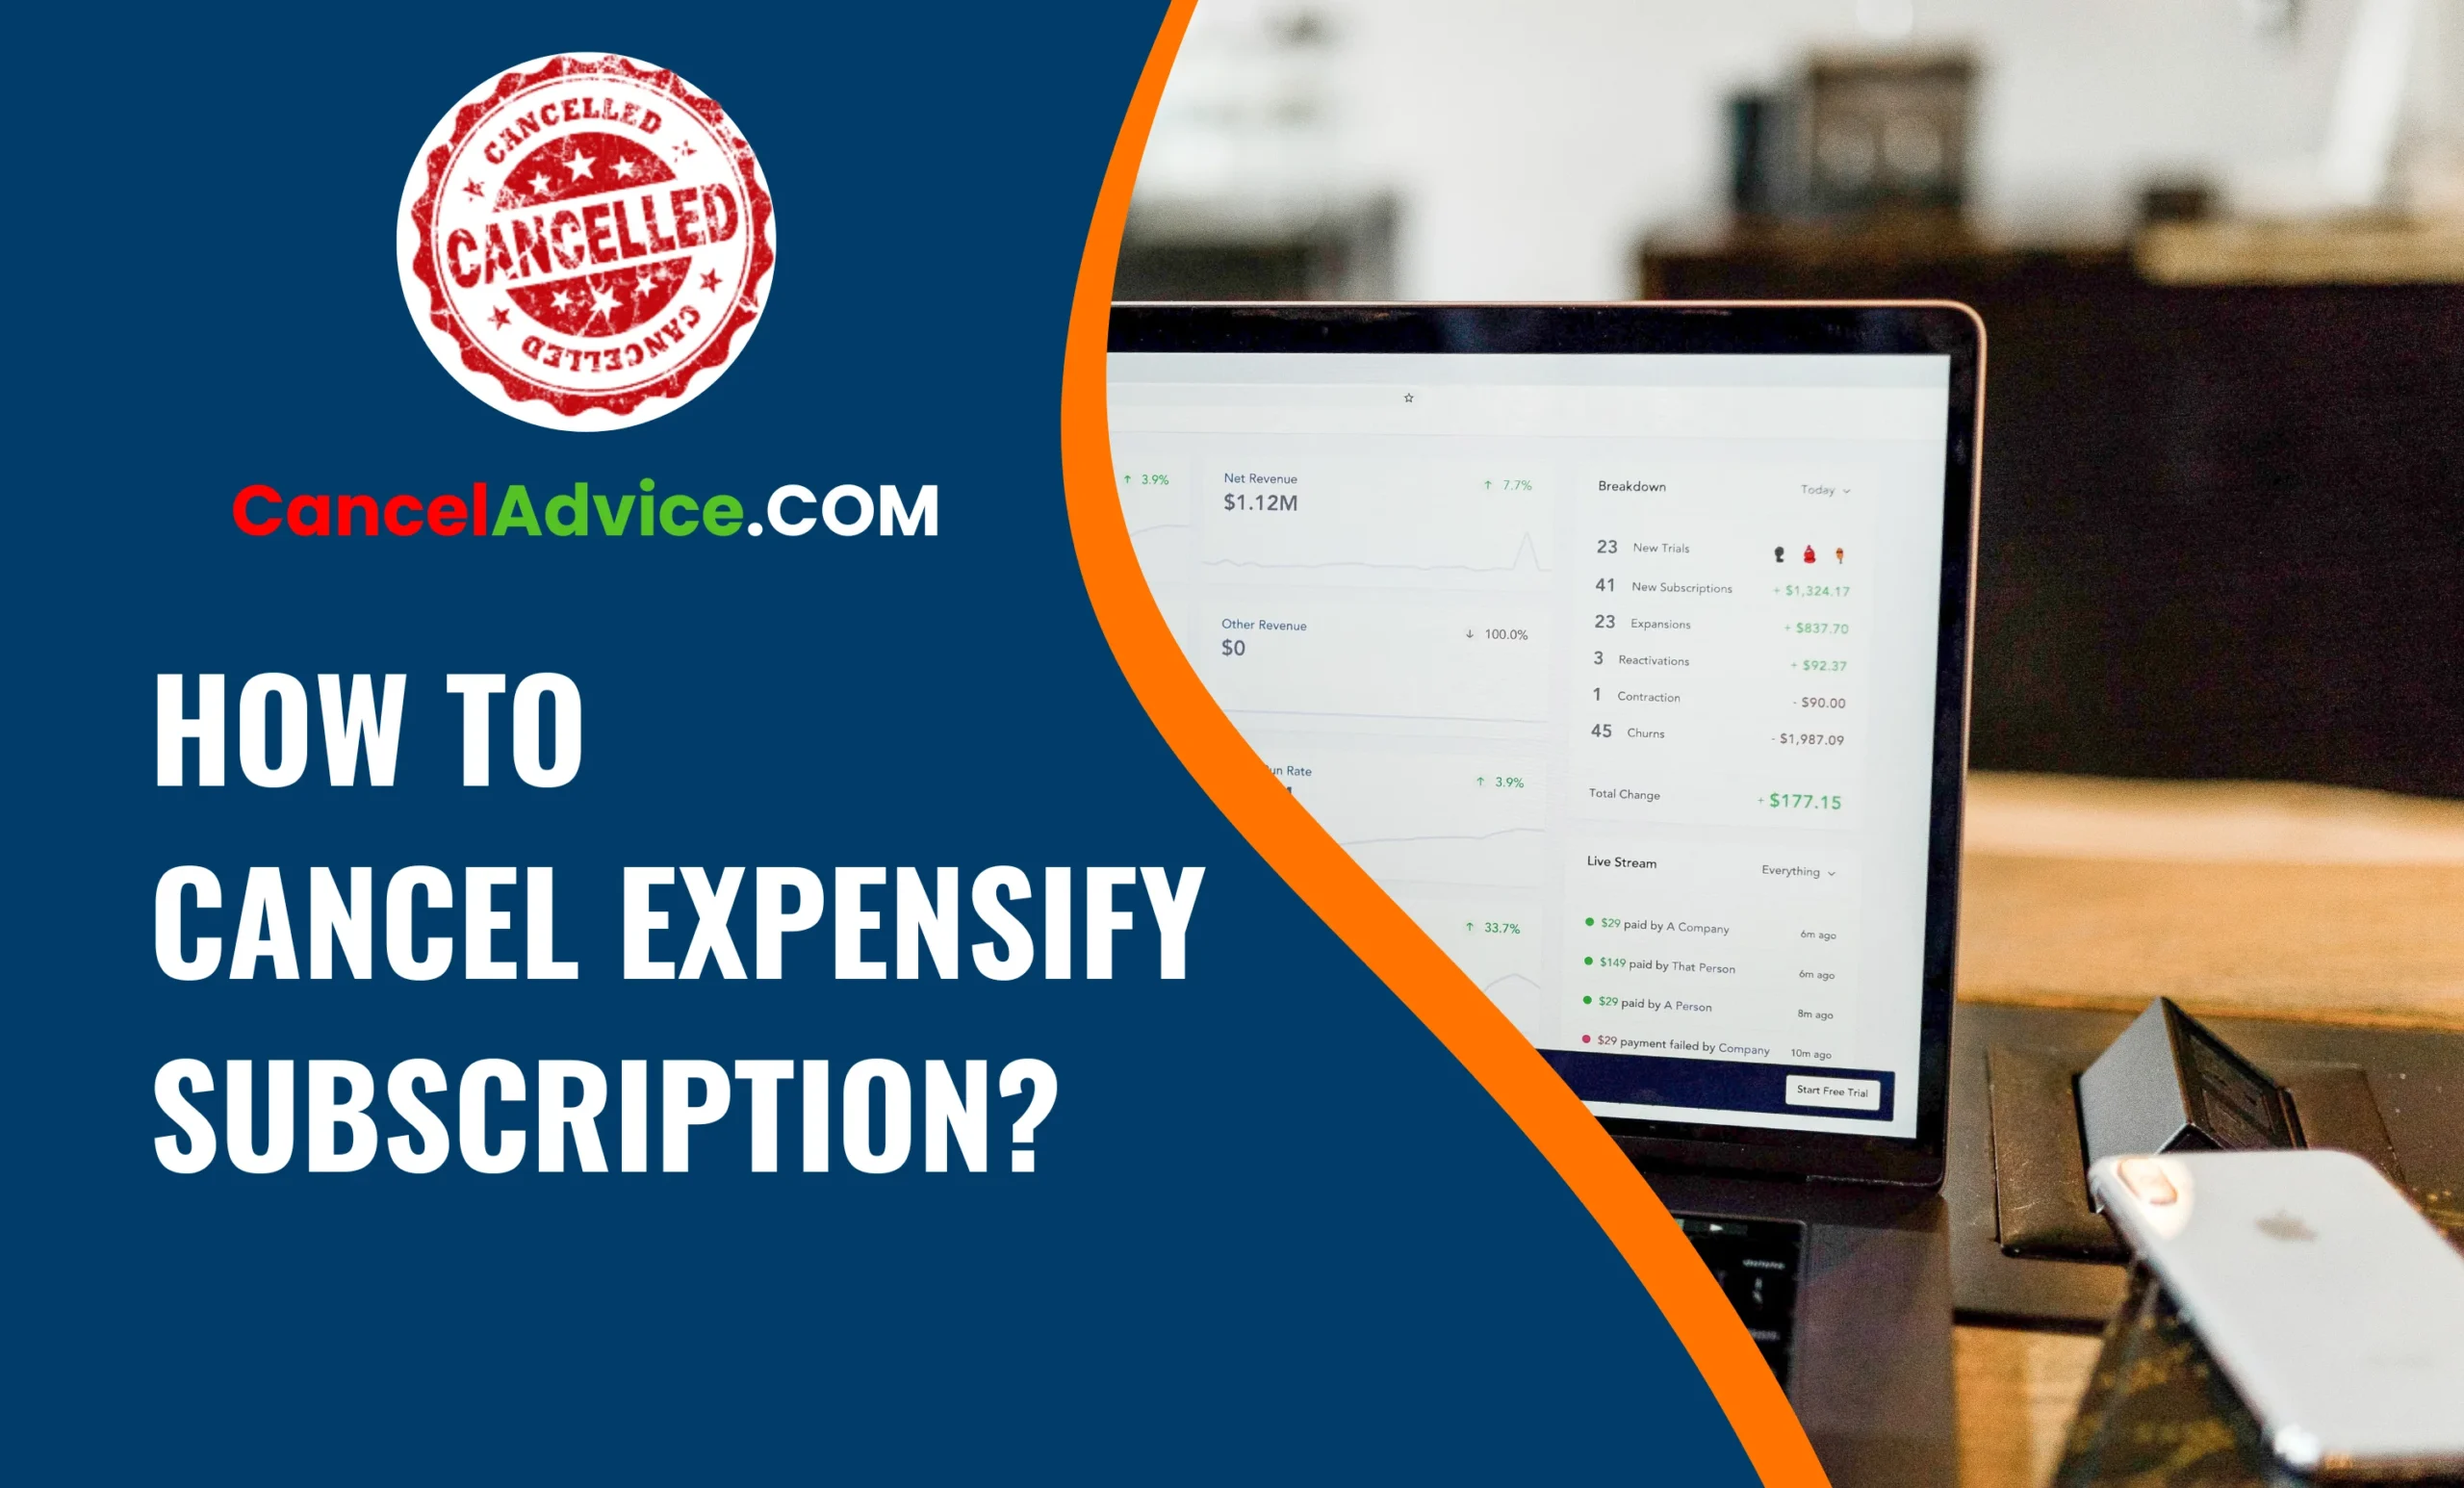 How To Cancel Expensify Subscription